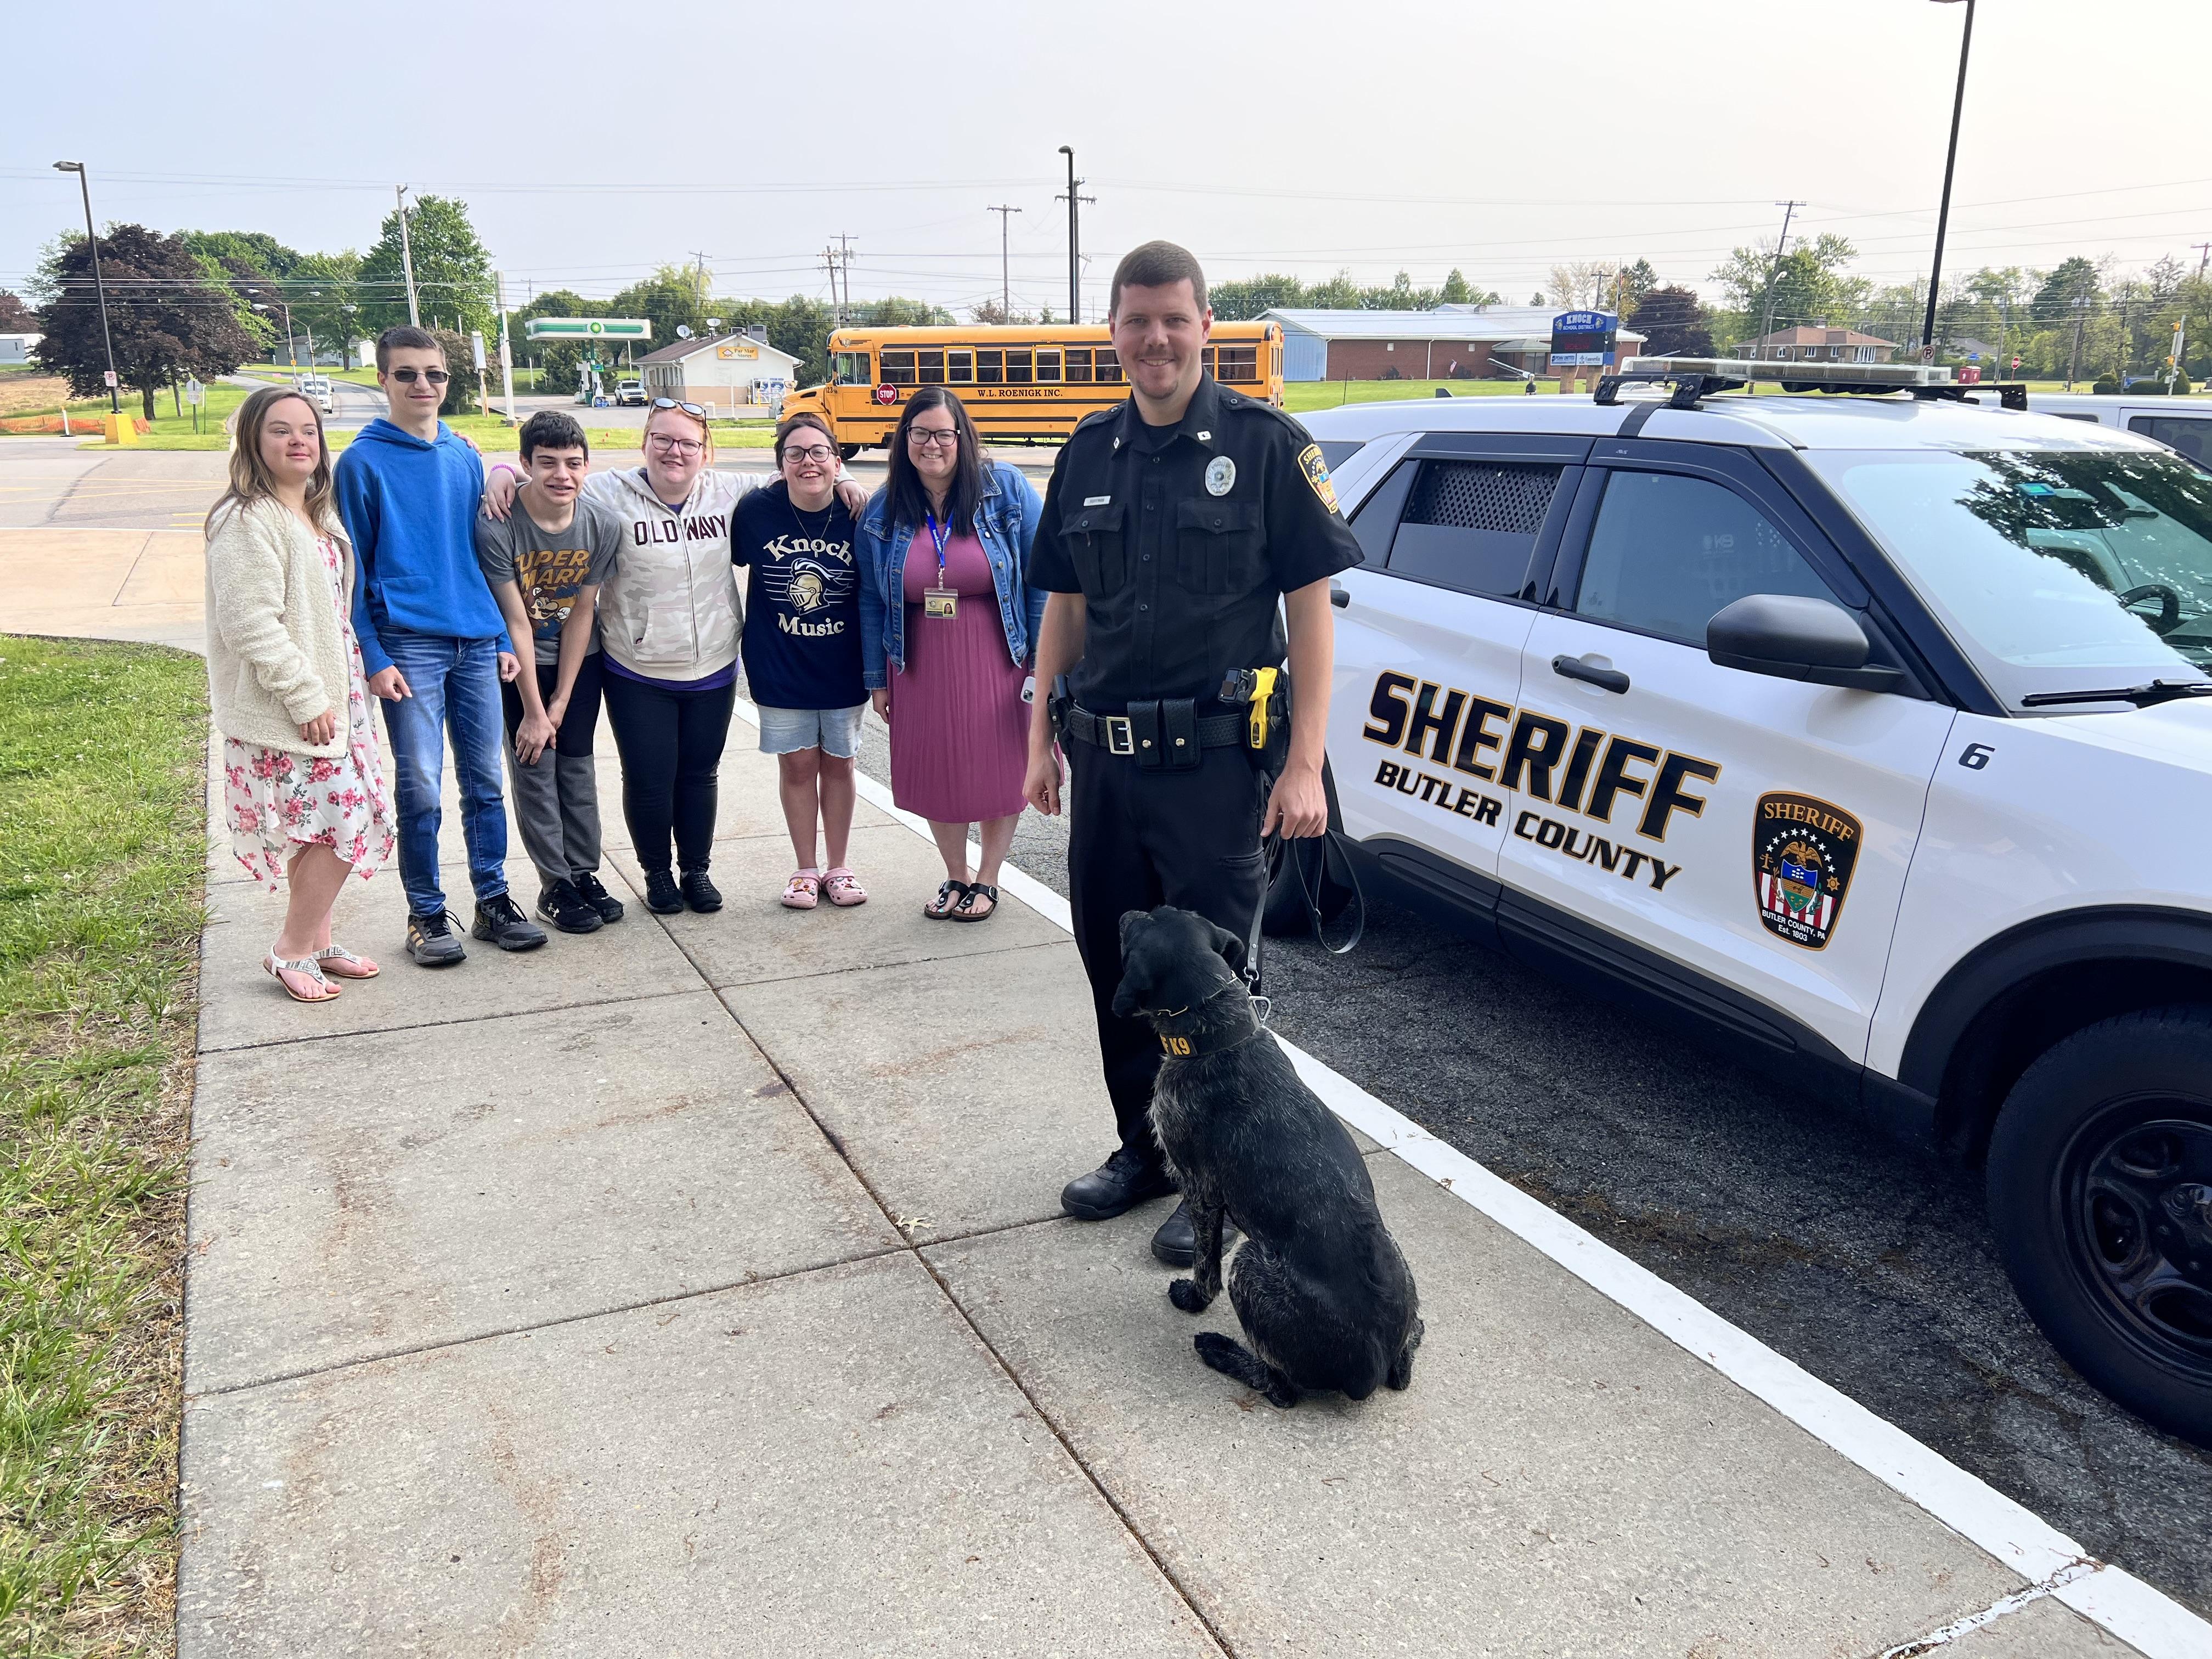 pic of an officer and a K9 with students